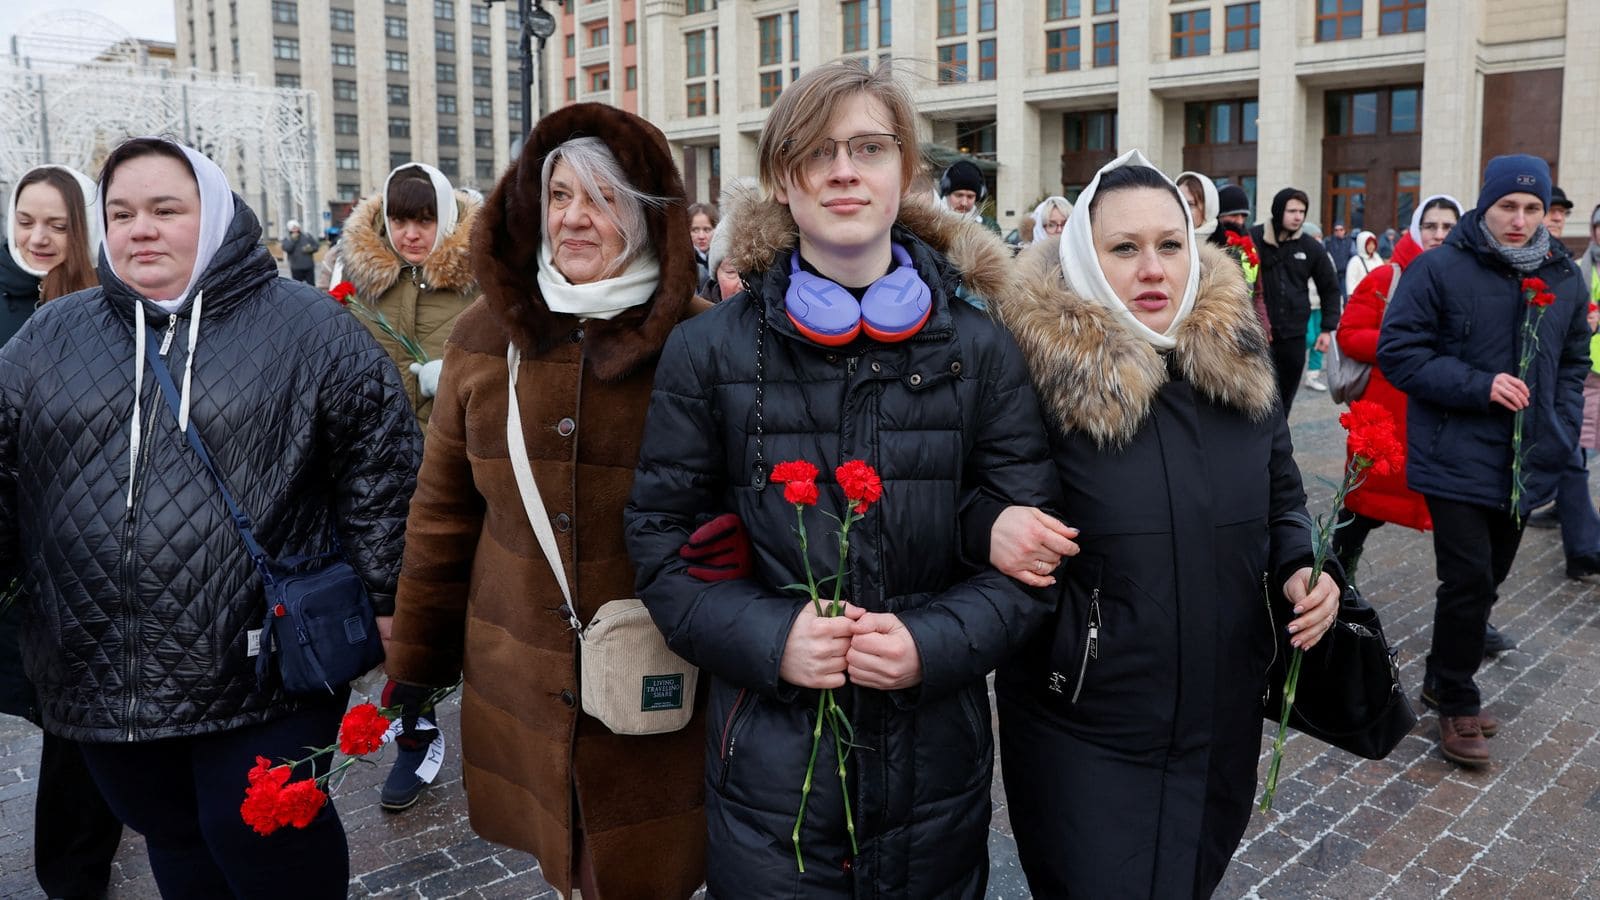 Wives of Russian soldiers protest to get their husbands back (Credits: SkyNews)